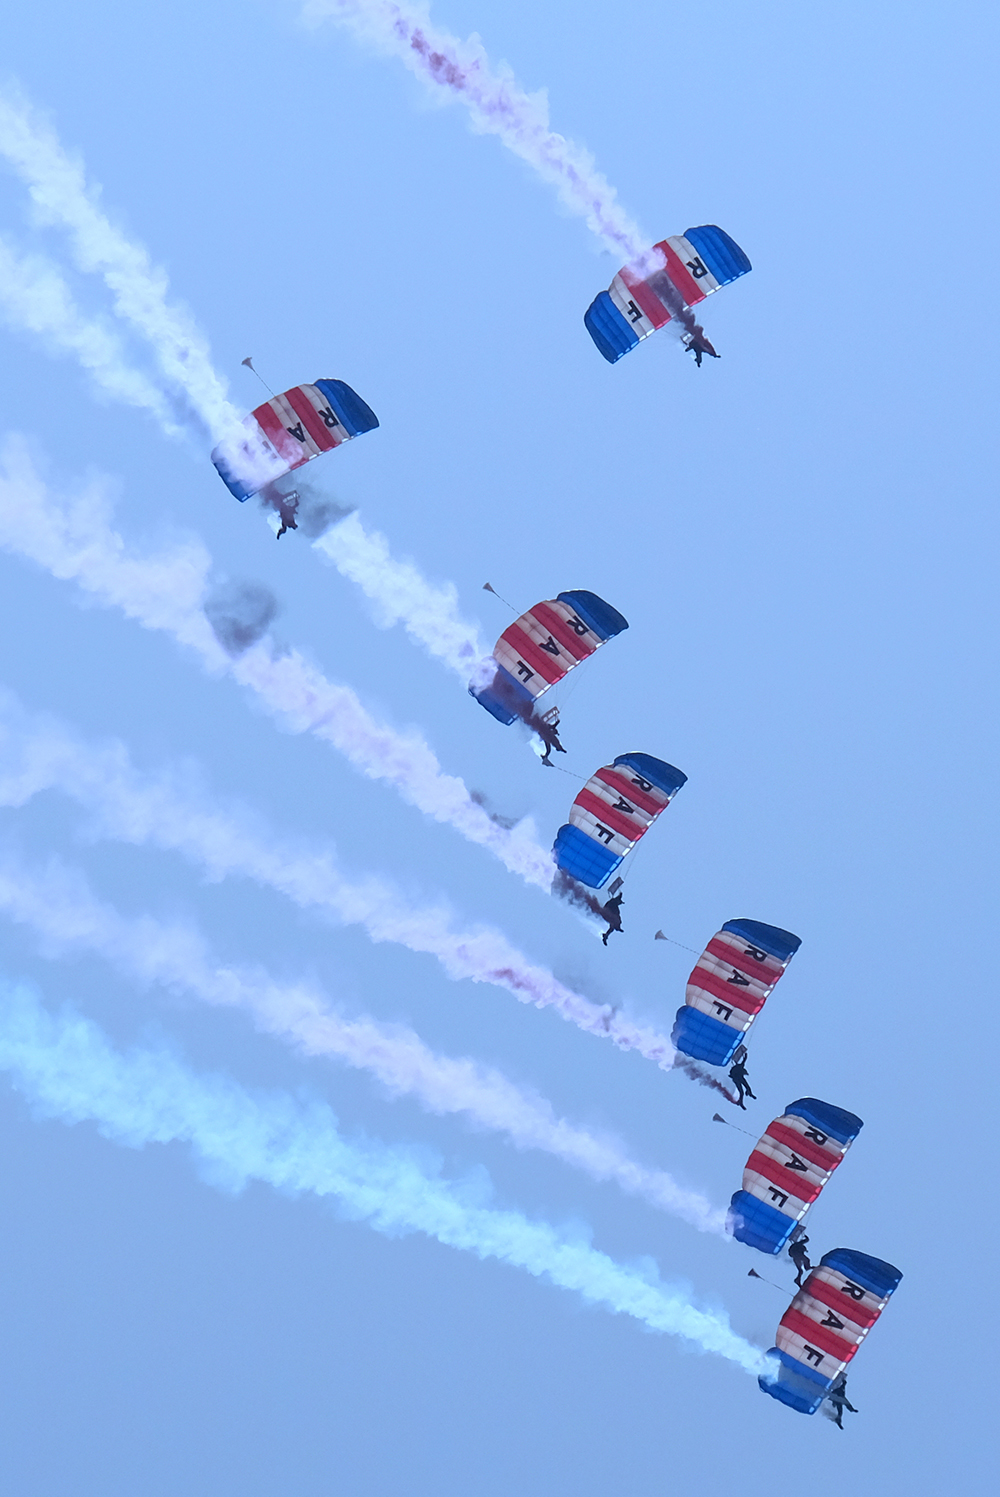 The RAF Falcons performing for Armed Forces Day in Salisbury, Wiltshire.